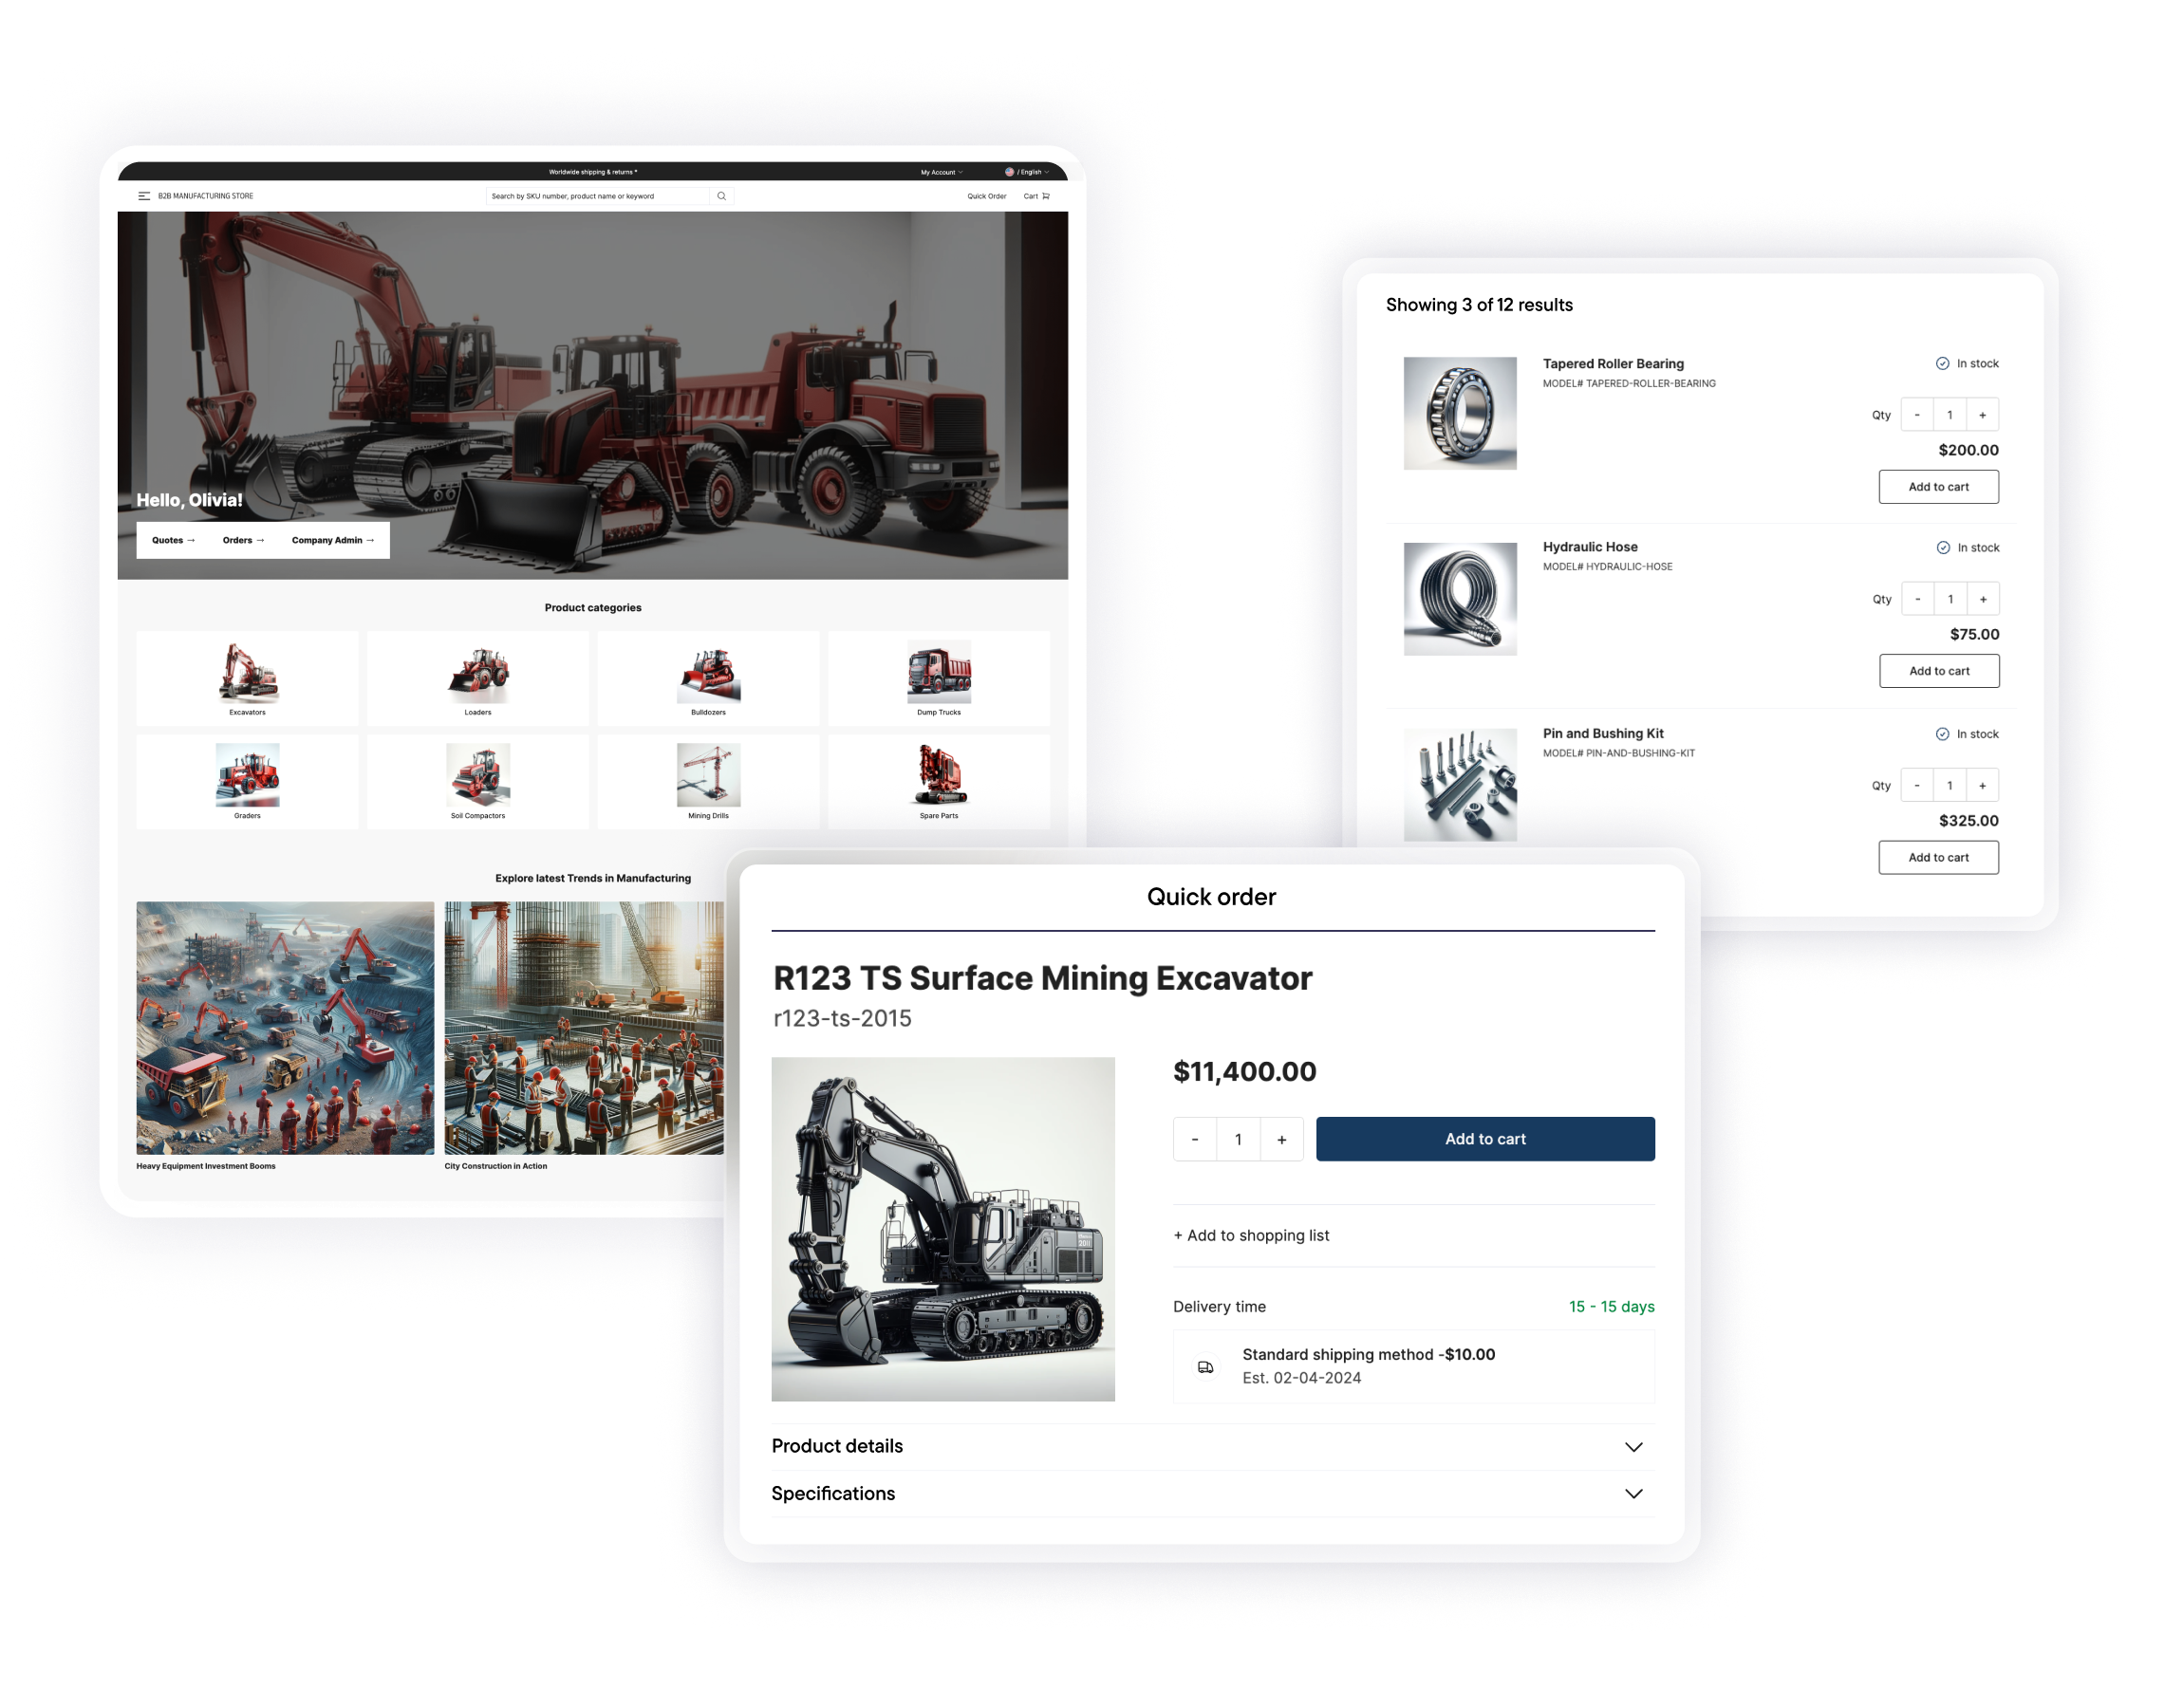 commercetools Foundry for B2B manufacturers